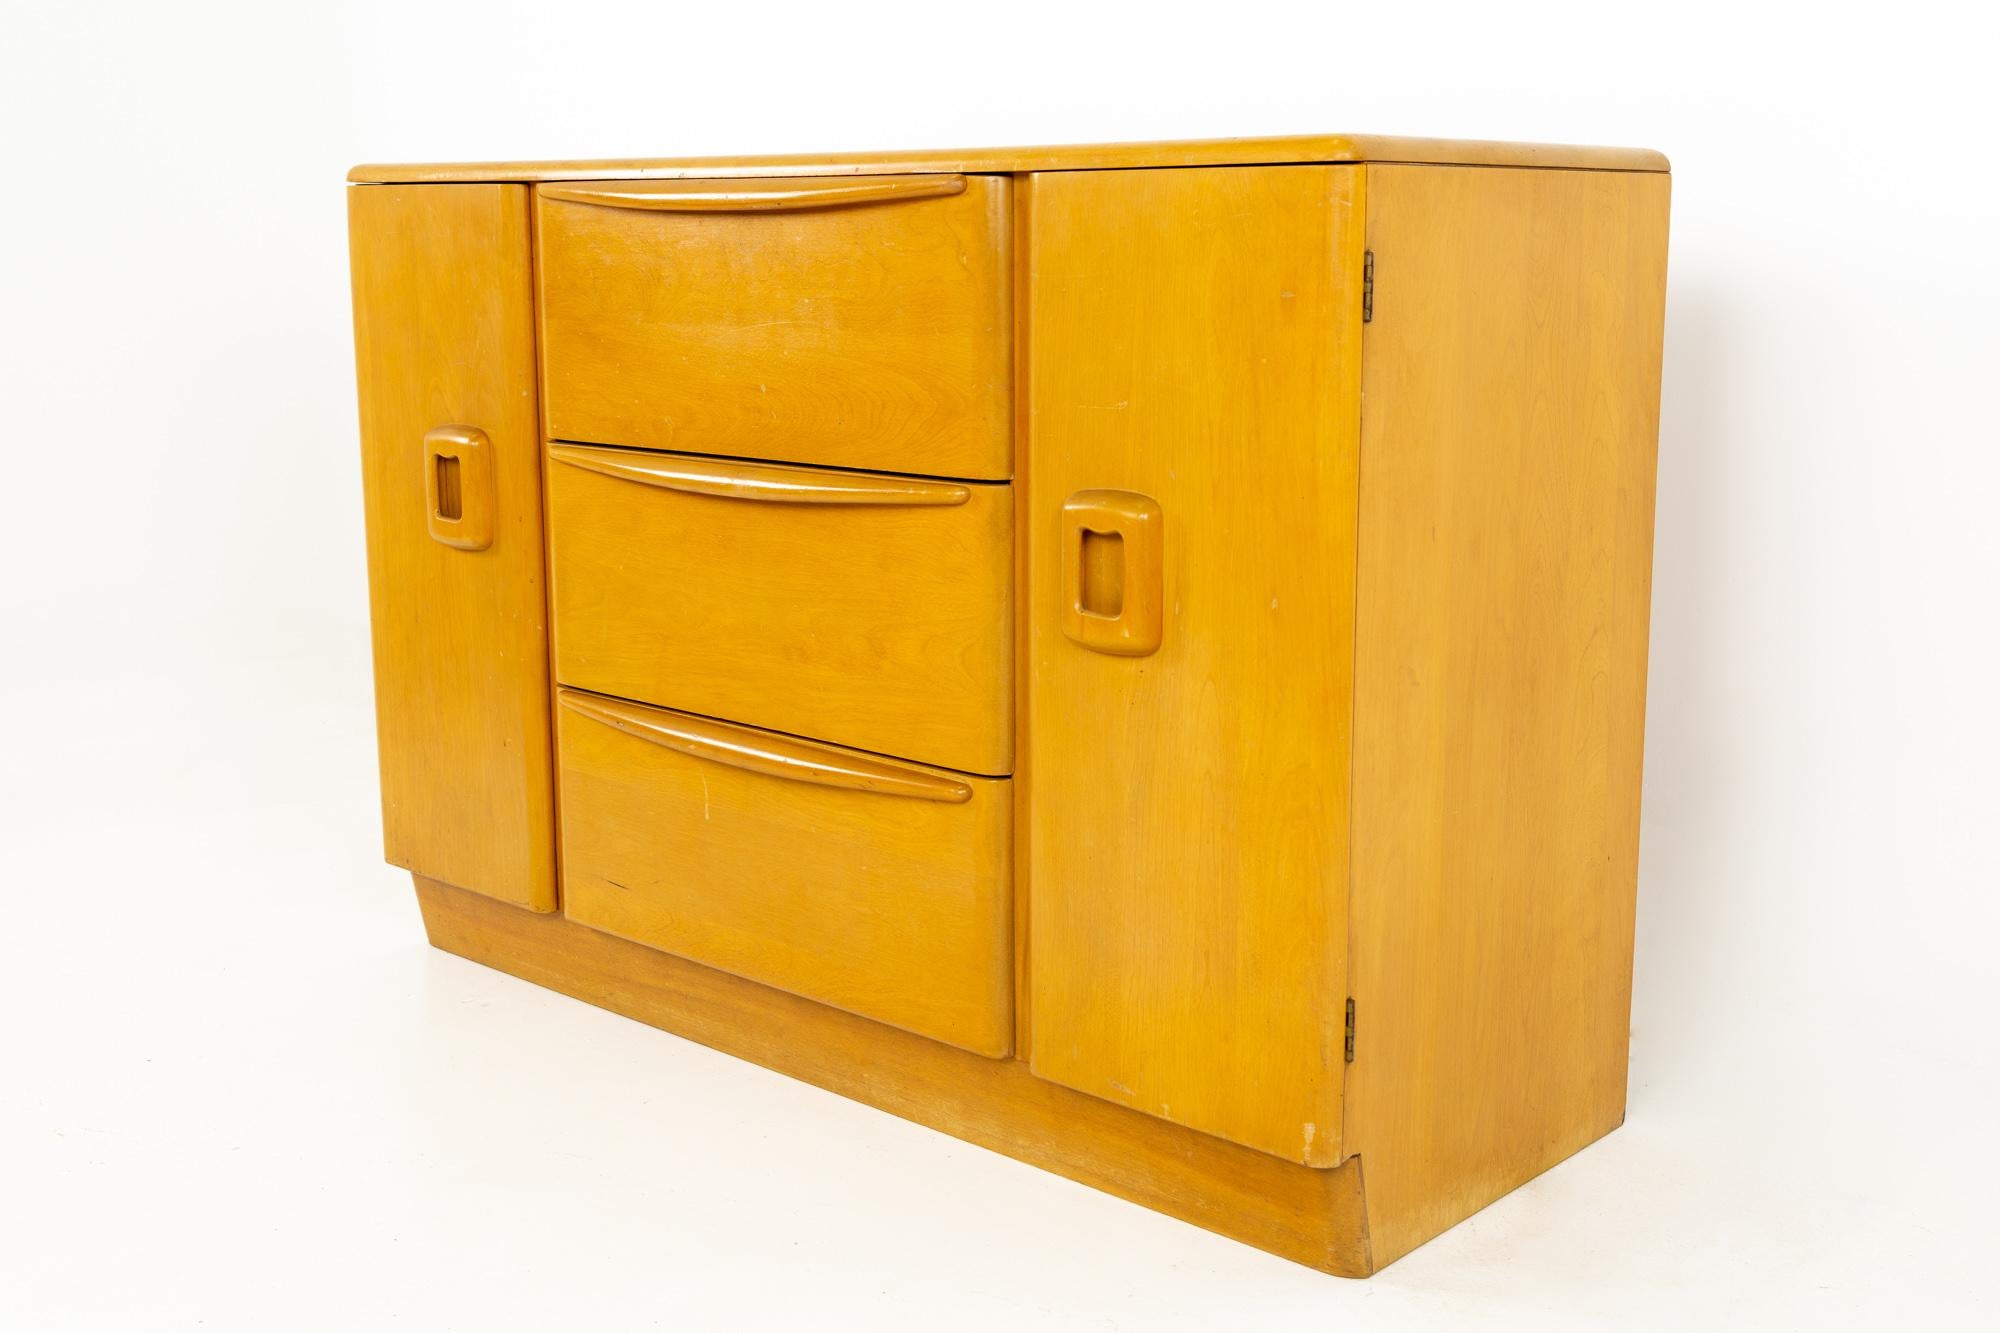 Heywood Wakefield mid century blonde solid wood sideboard buffet credenza
This piece measures 48 wide x 18.75 deep x 32.5 inches high

All pieces of furniture can be had in what we call restored vintage condition. That means the piece is restored